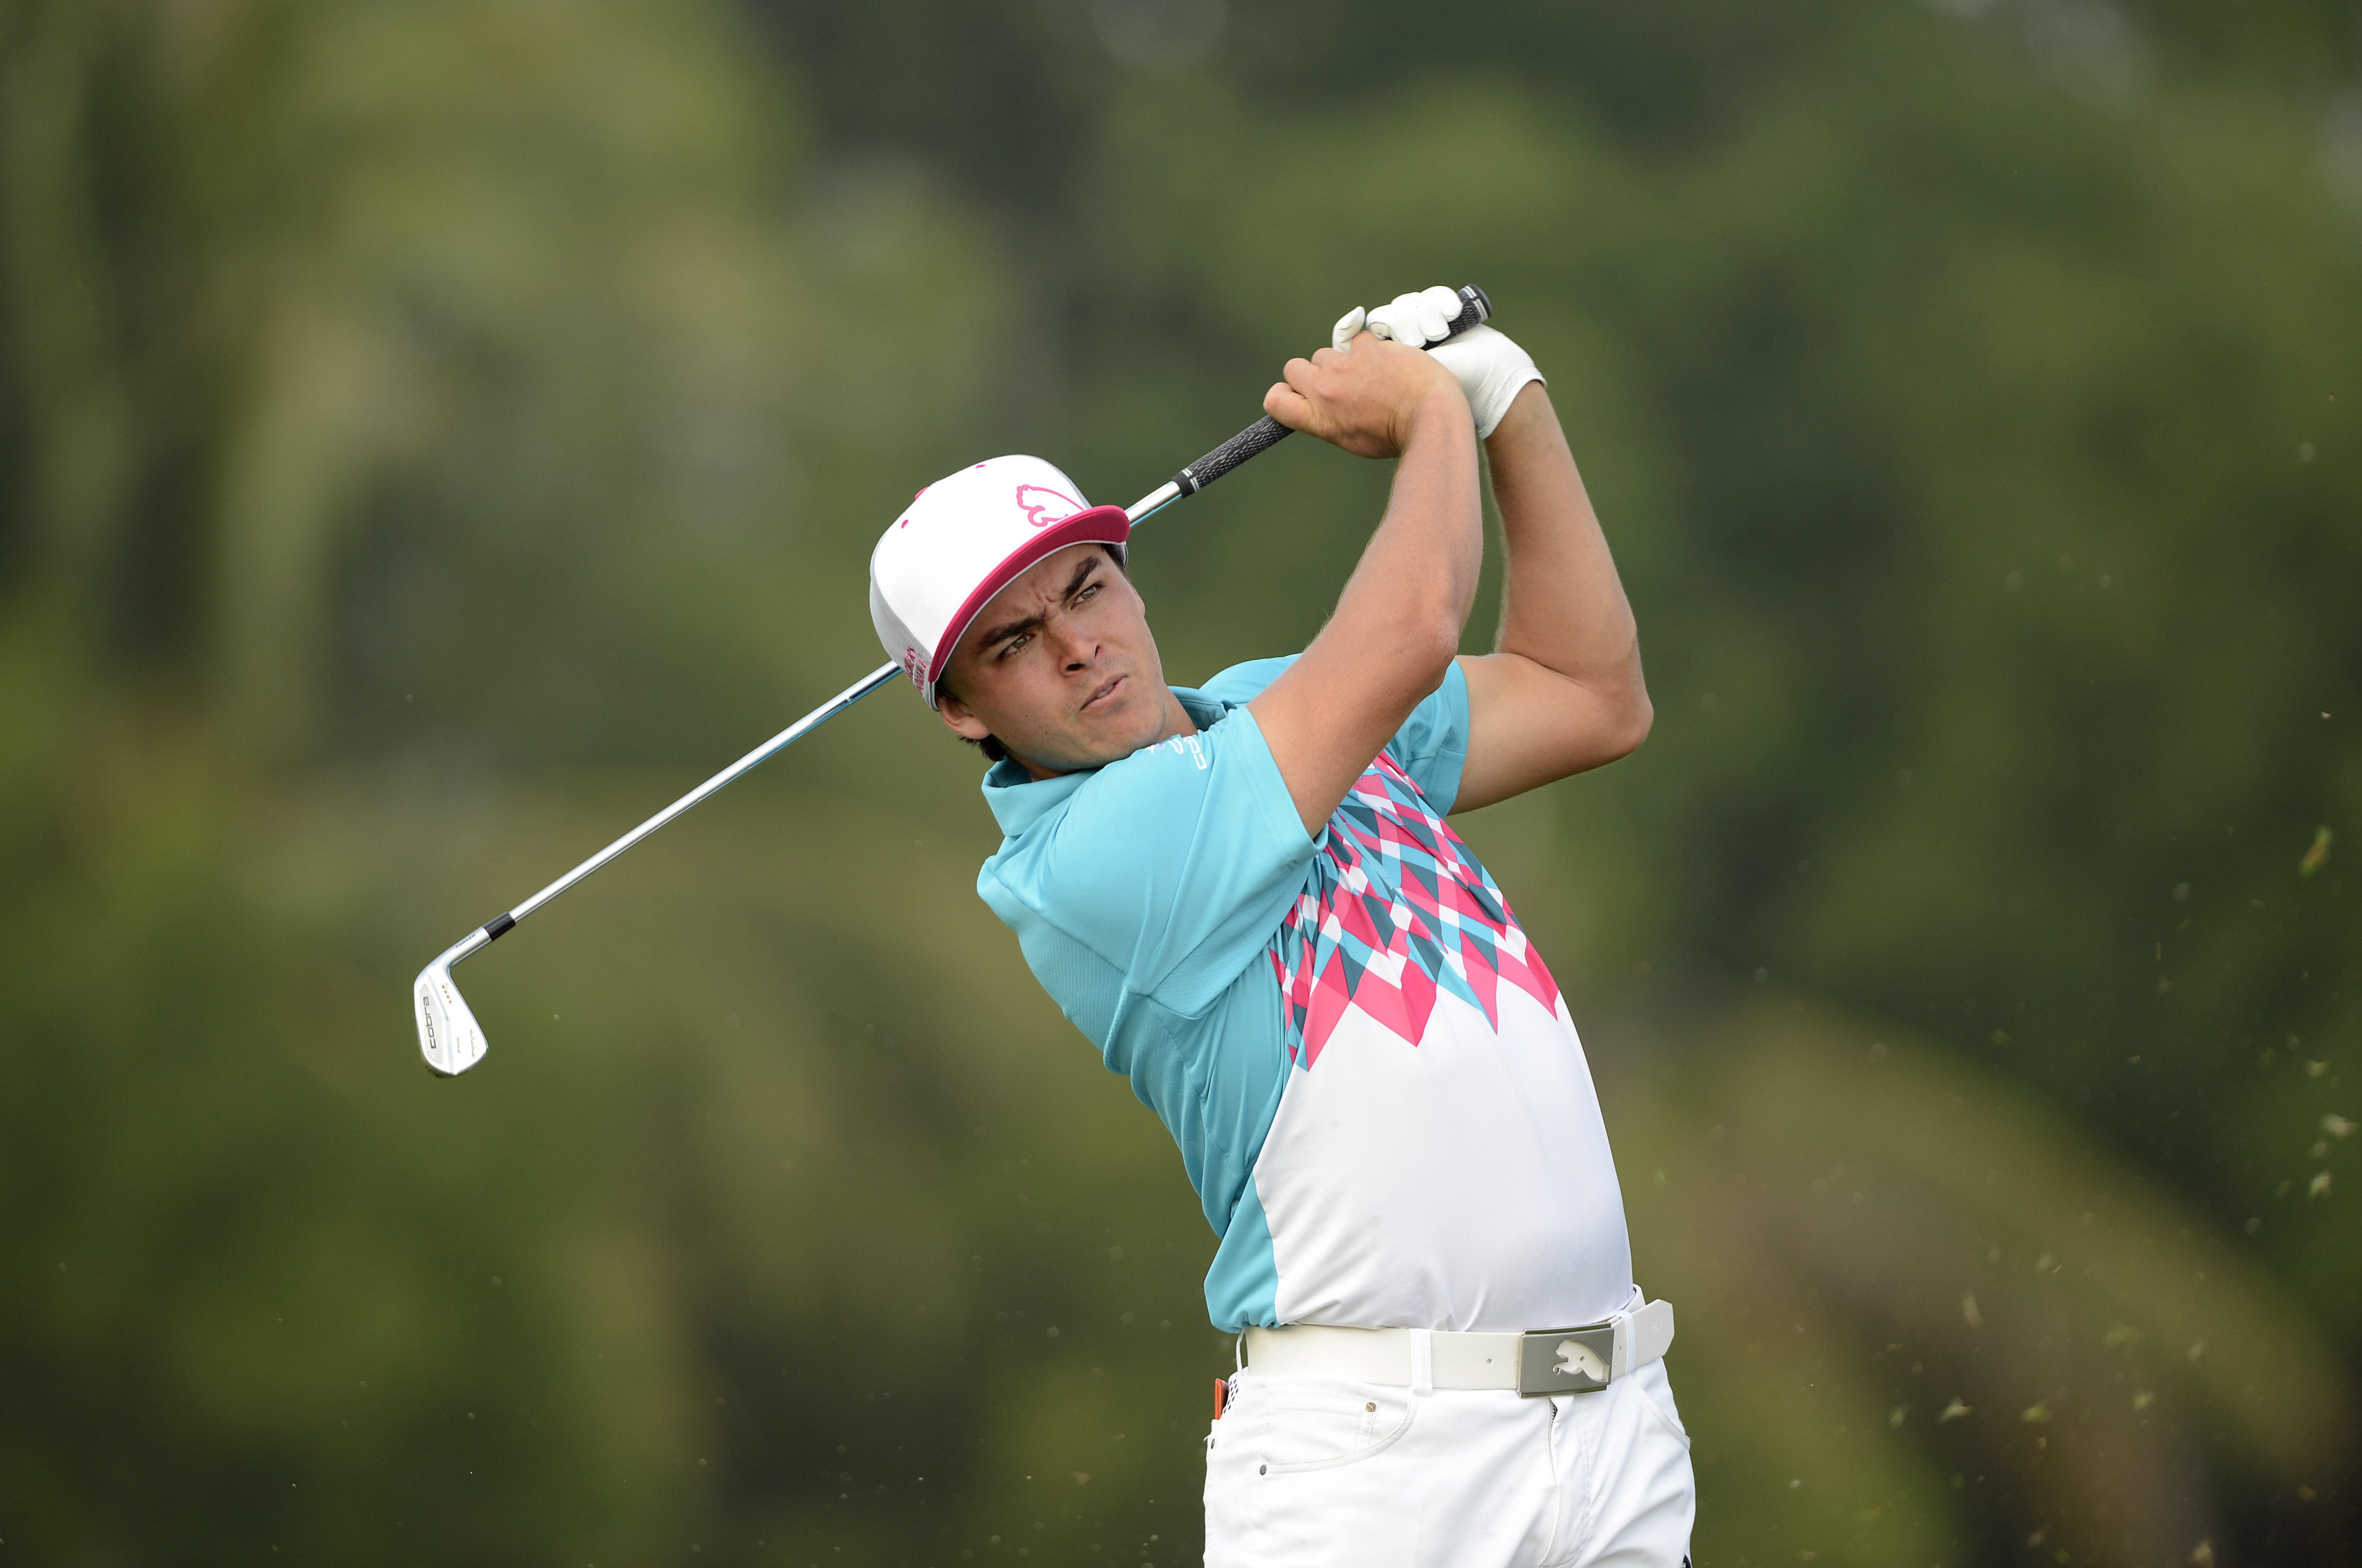 Rickie Fowler | Asian Tour – Professional Golf in Asia